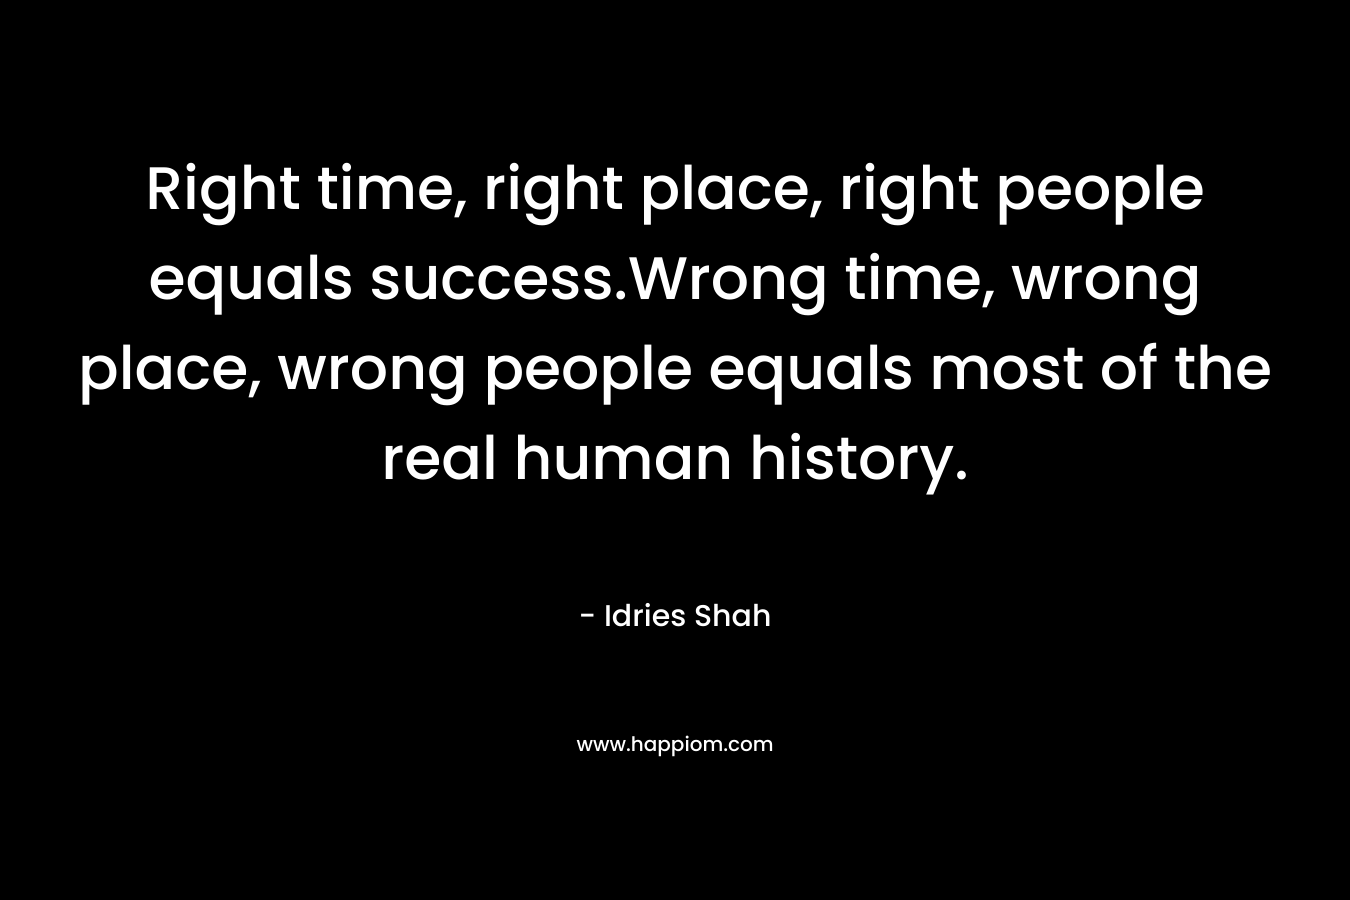 Right time, right place, right people equals success.Wrong time, wrong place, wrong people equals most of the real human history.